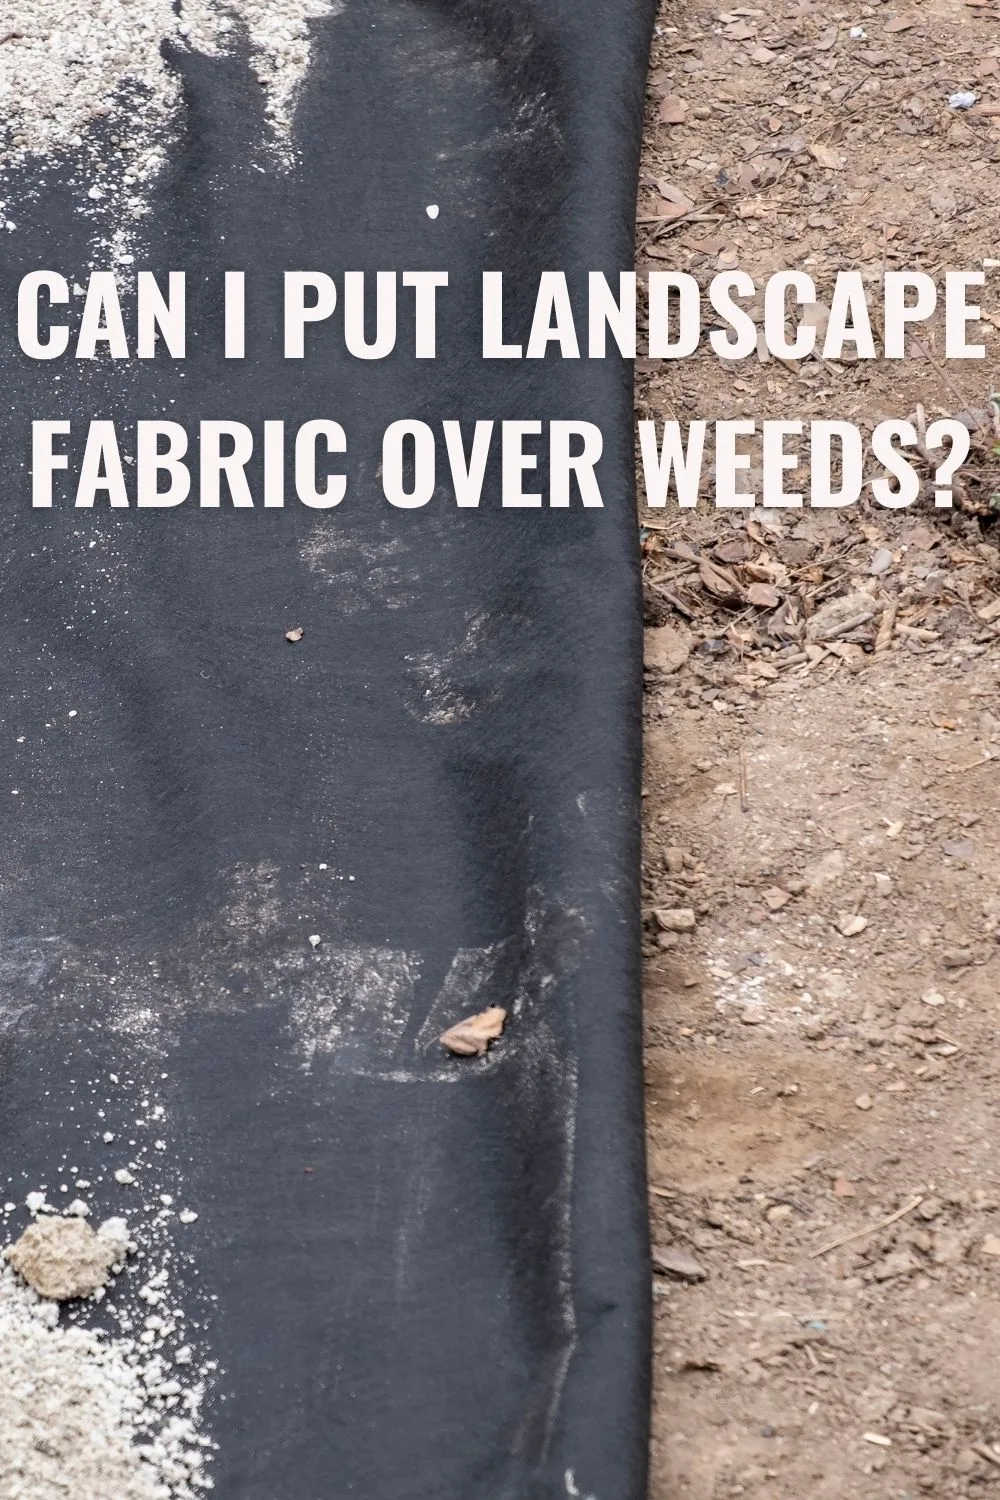 can I put landscape fabric over weeds